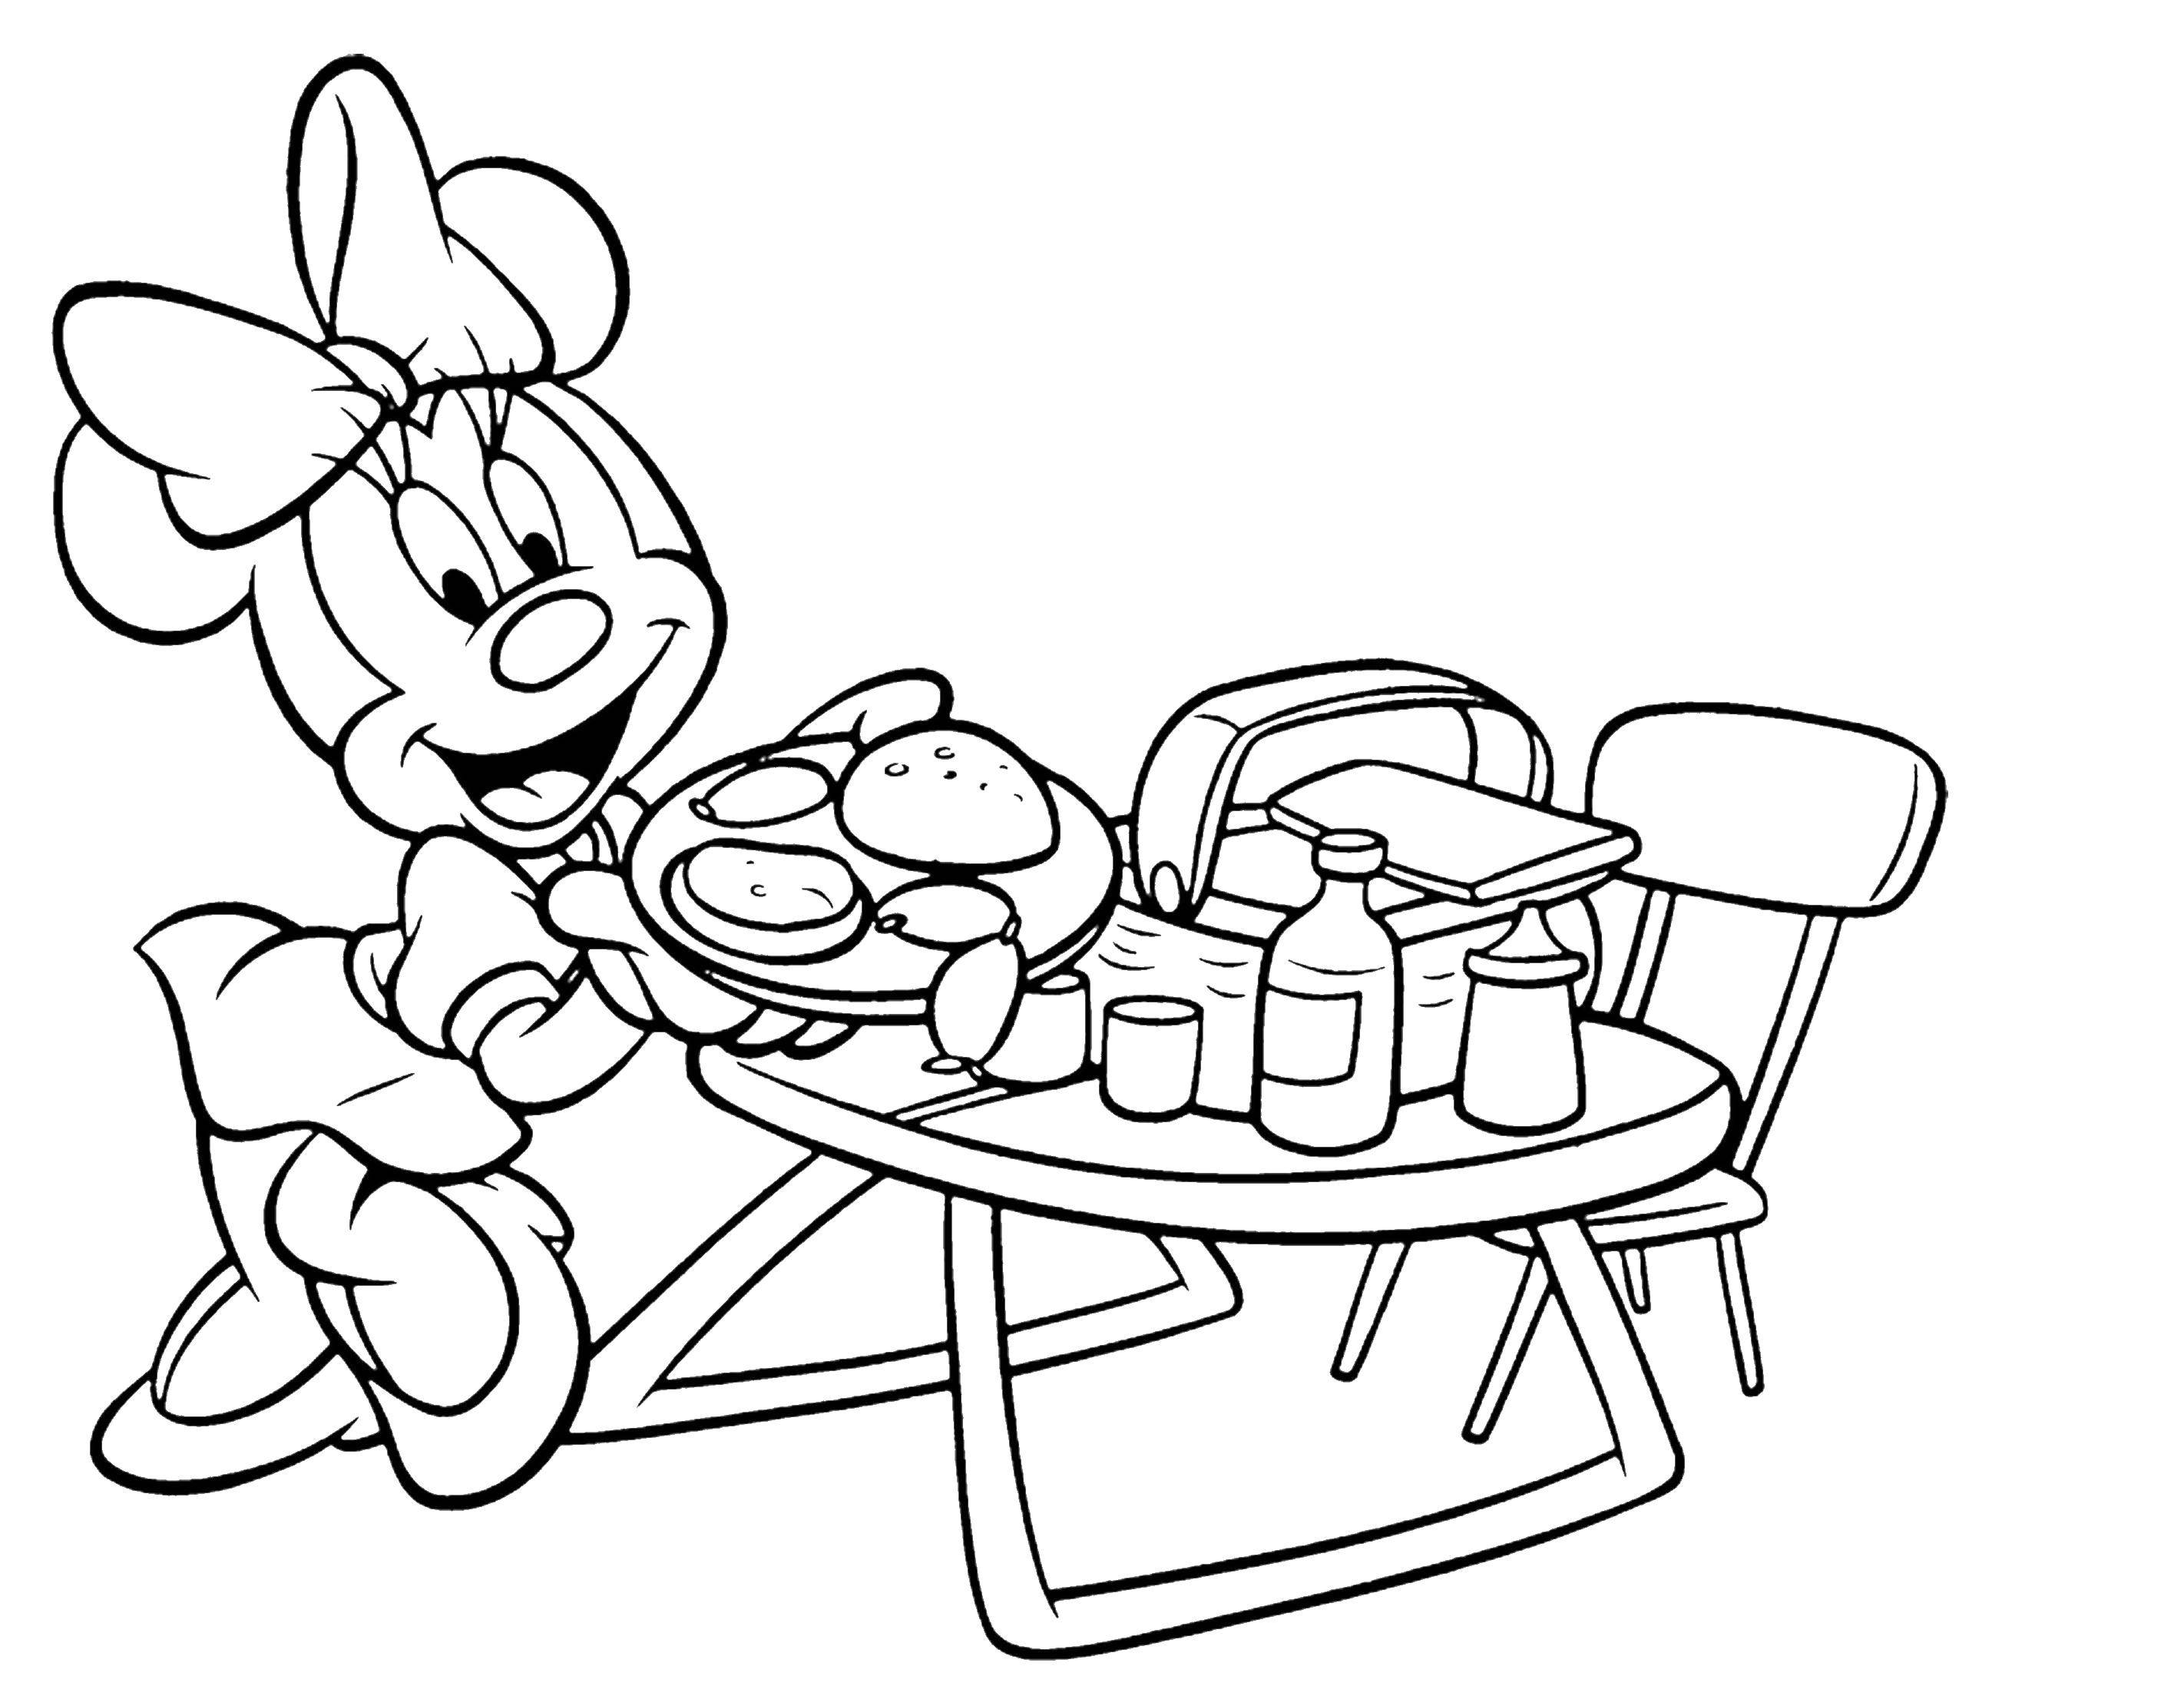 Coloring Minnie mouse cooks food for a picnic. Category cartoons. Tags:  Minnie, Mickymaus.